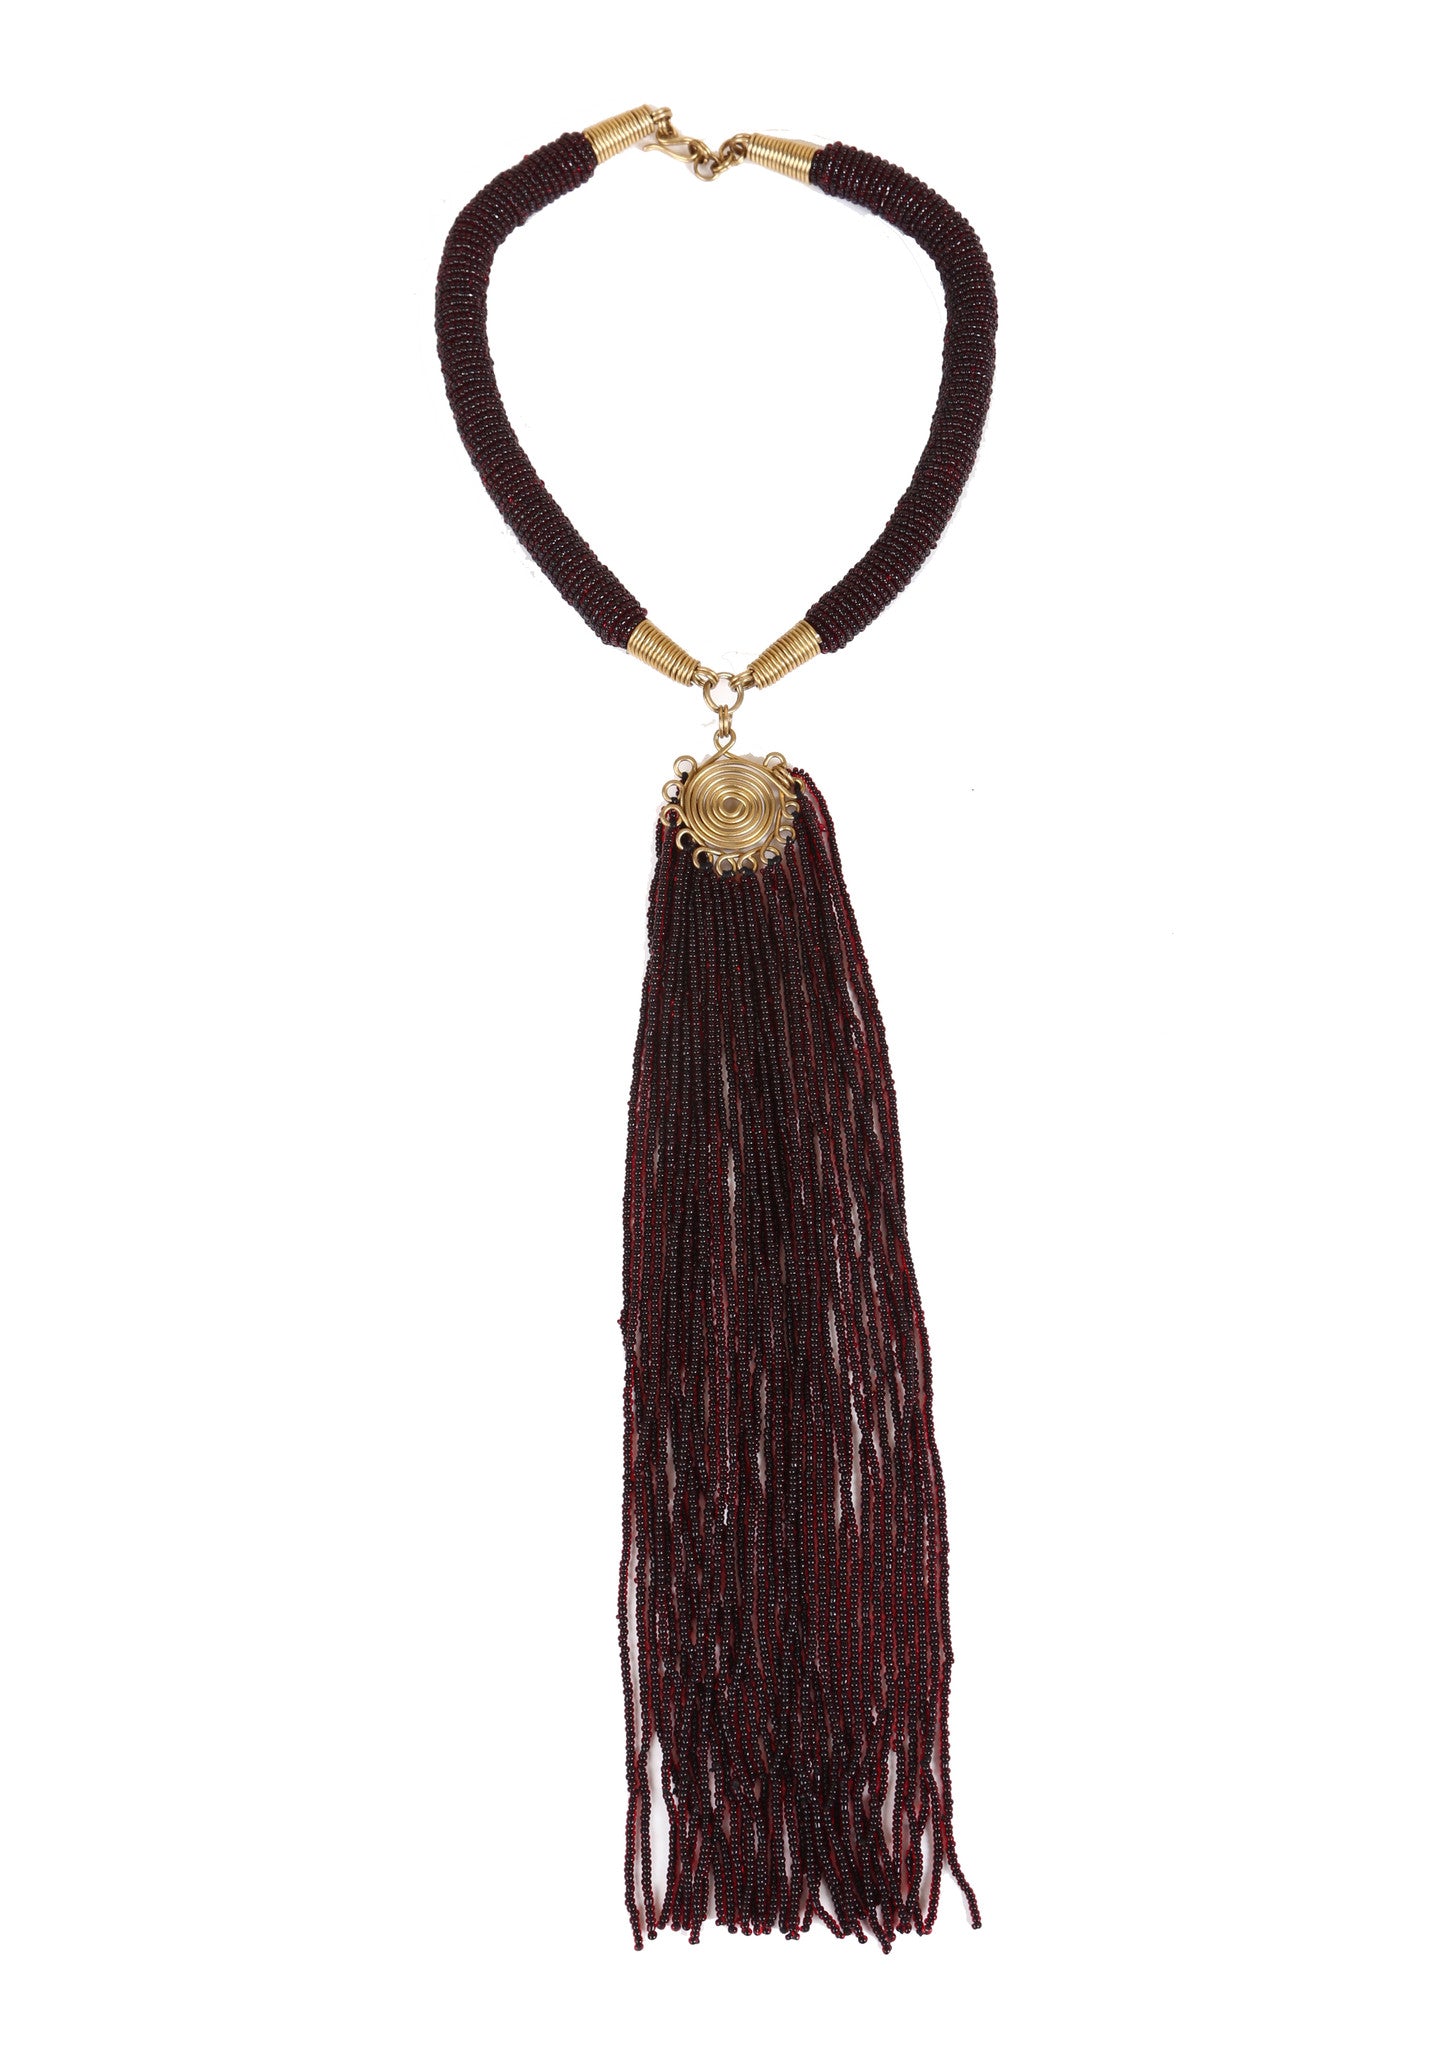 A collection of glass beads delicately strung to create this vivid tassle necklace. The beauty of African jewlery is showcased in this gorgeous handcrafted necklace.